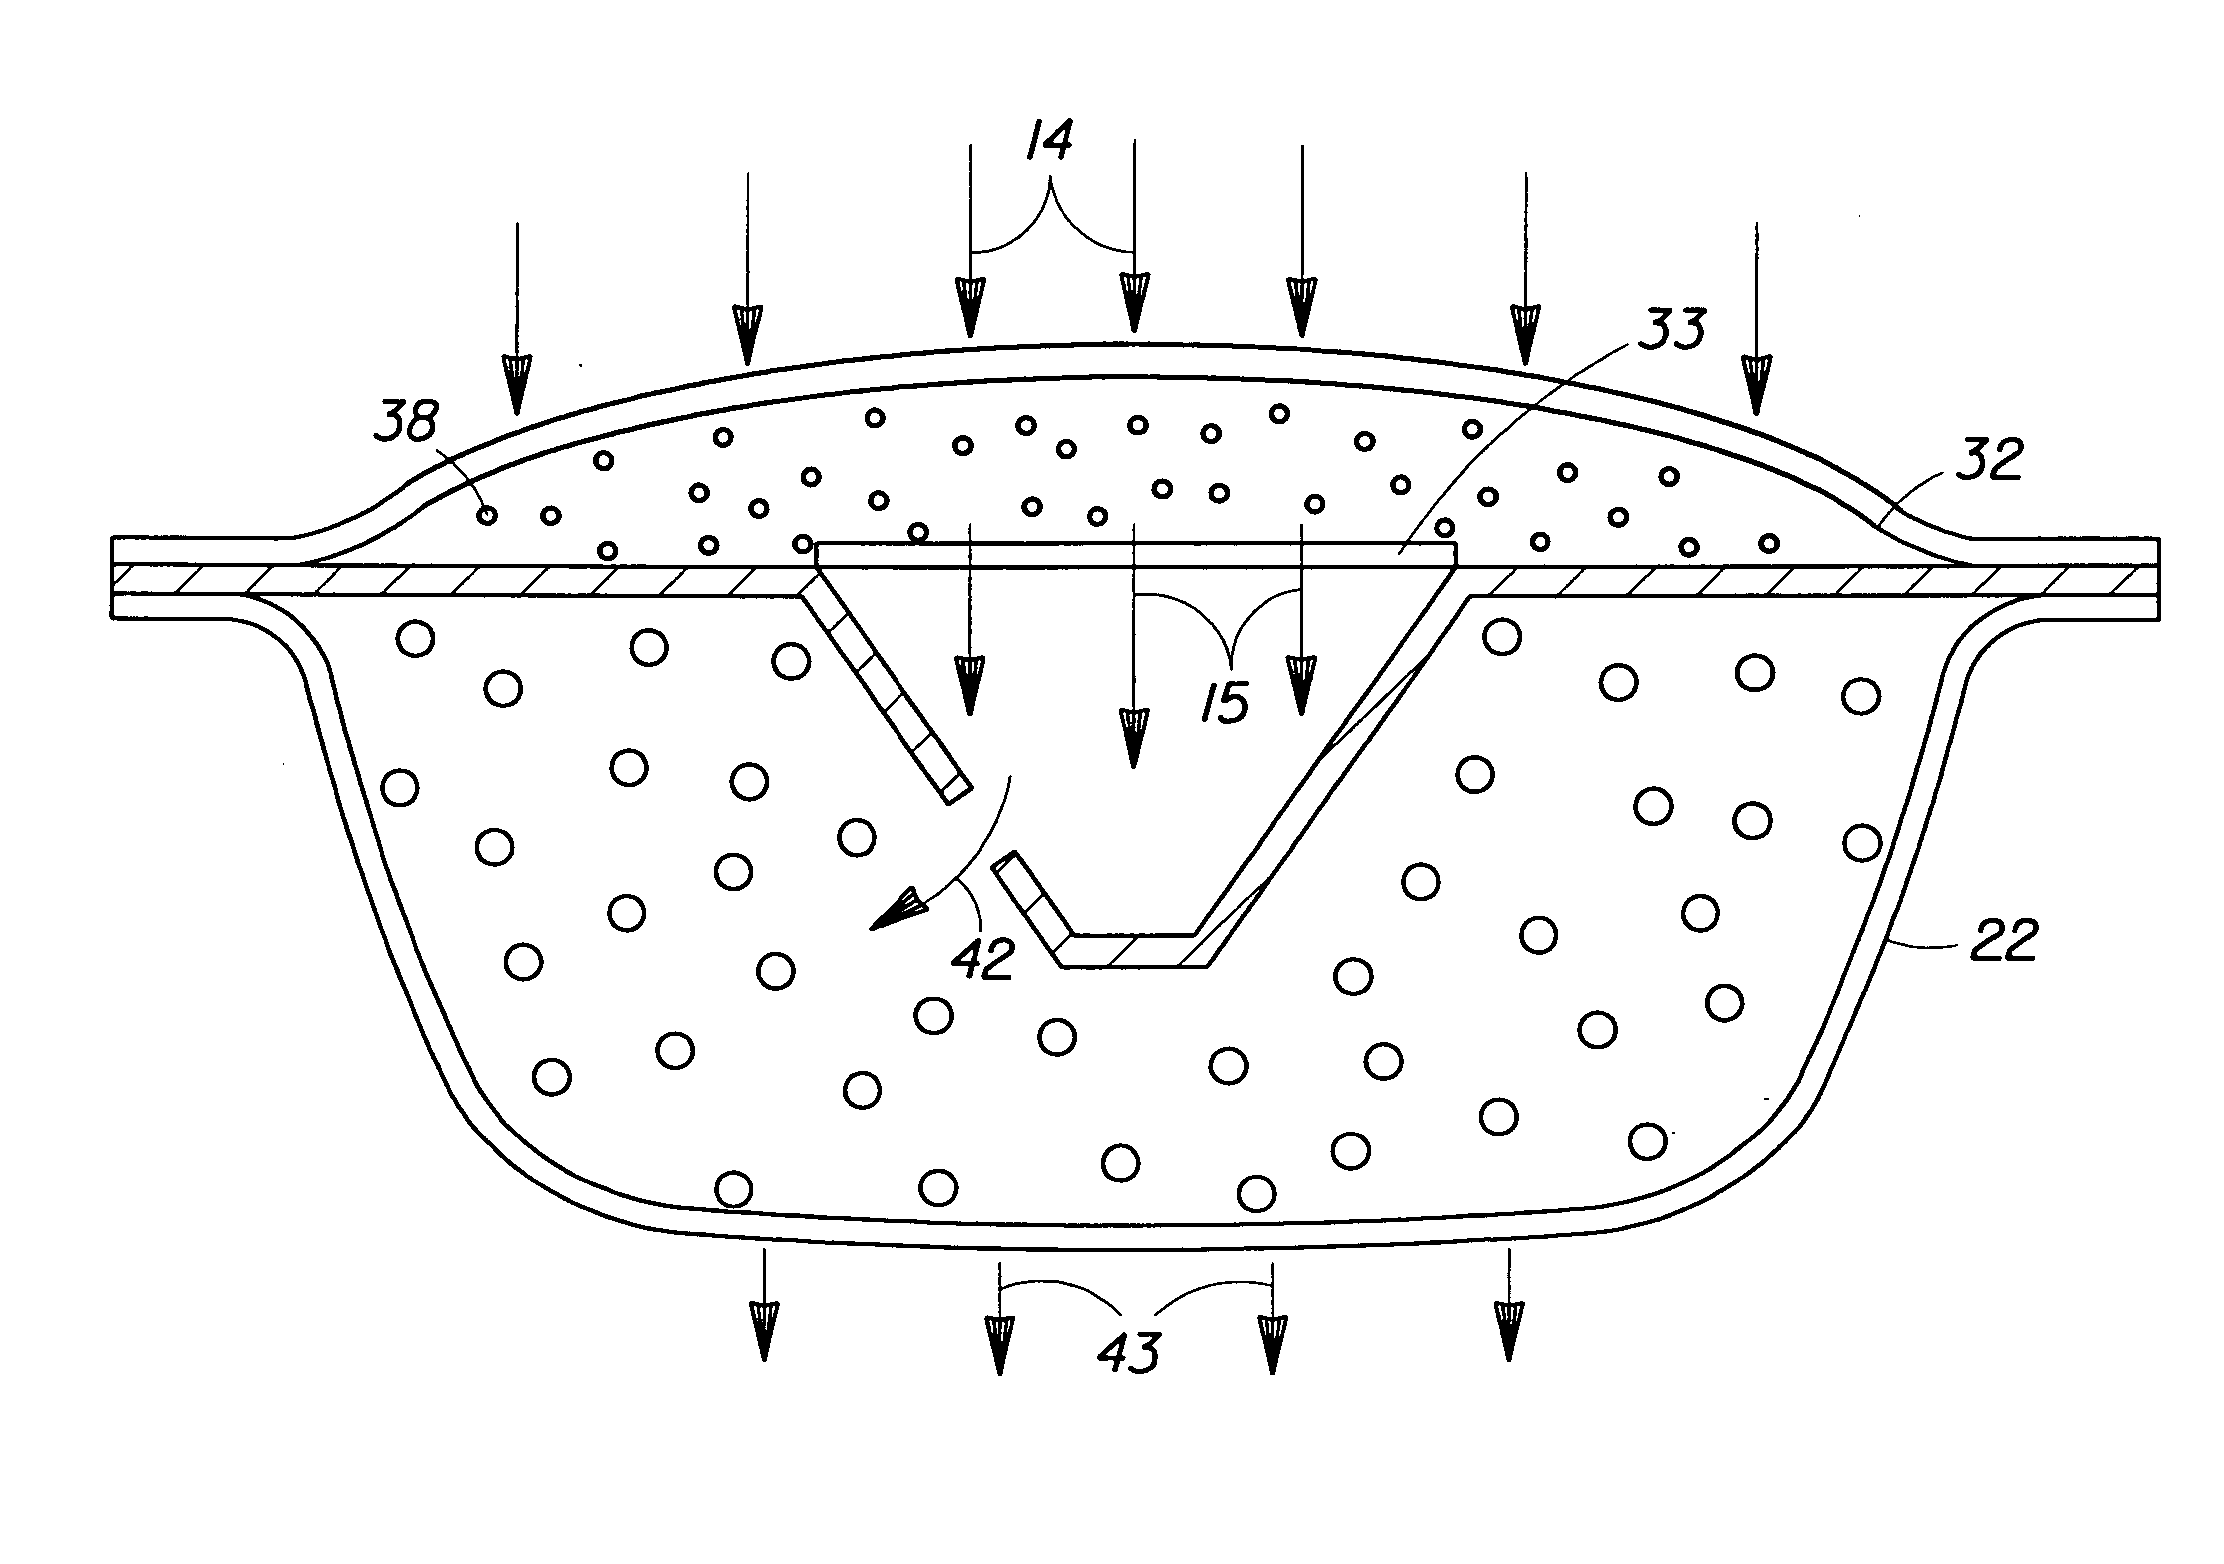 Liquid infusion pods containing insoluble materials